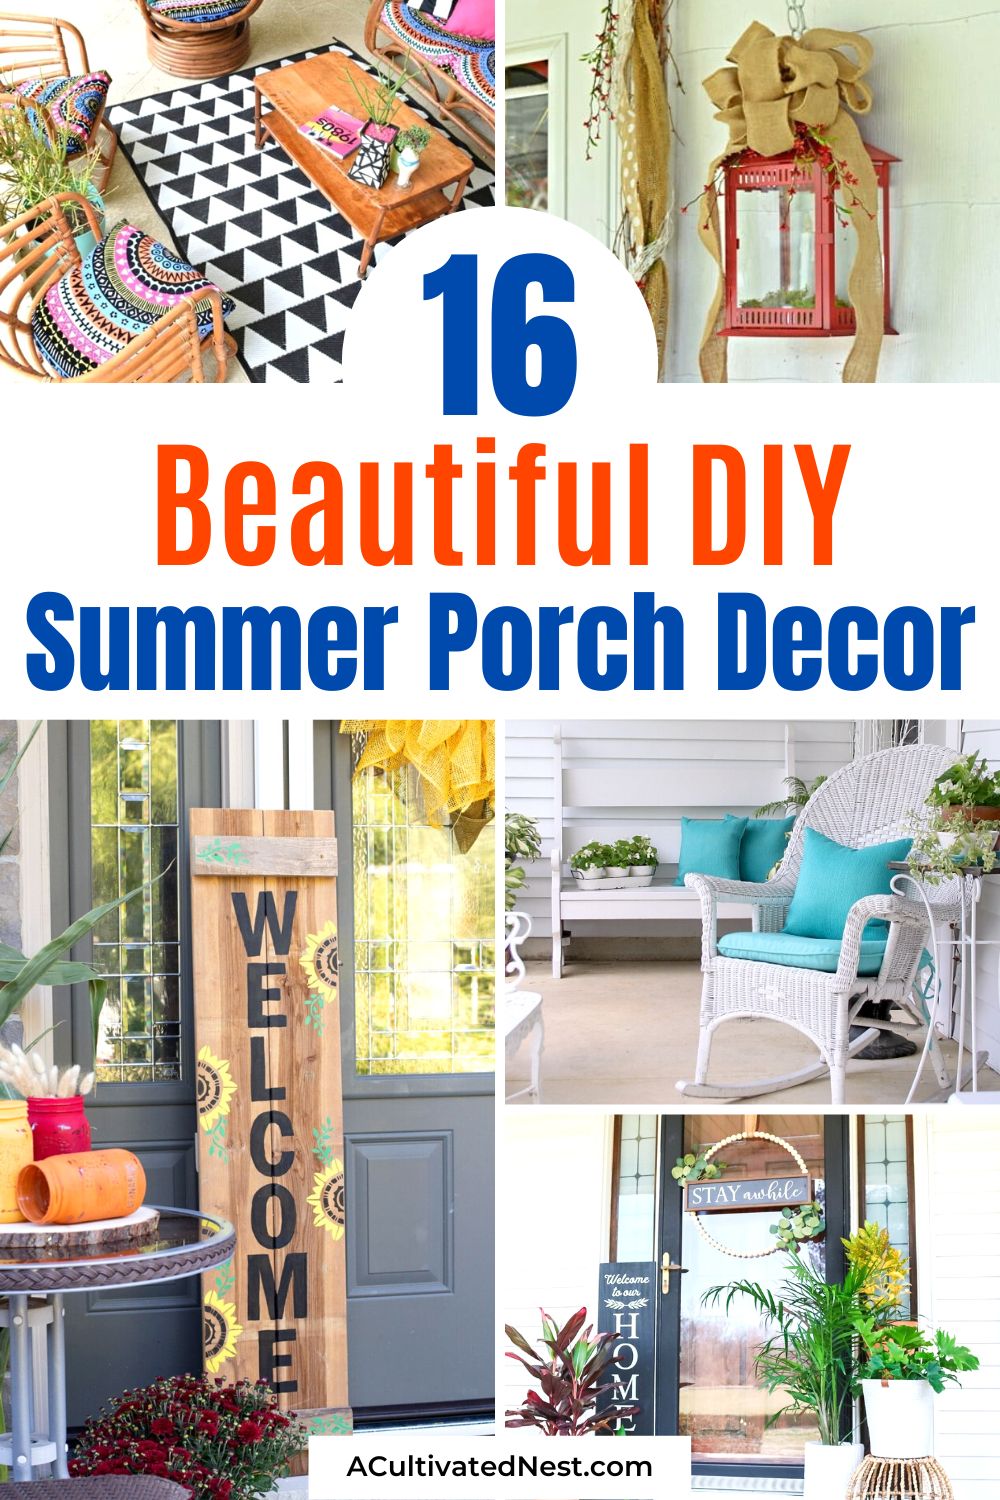 16 Beautiful DIY Porch Decor Ideas for Summer- Elevate your porch game this summer! Discover 16 beautiful and budget-friendly DIY porch decor ideas that will make your porch the envy of the neighborhood. | #OutdoorDecor #DIYProjects #PorchDecor #summer #ACultivatedNest